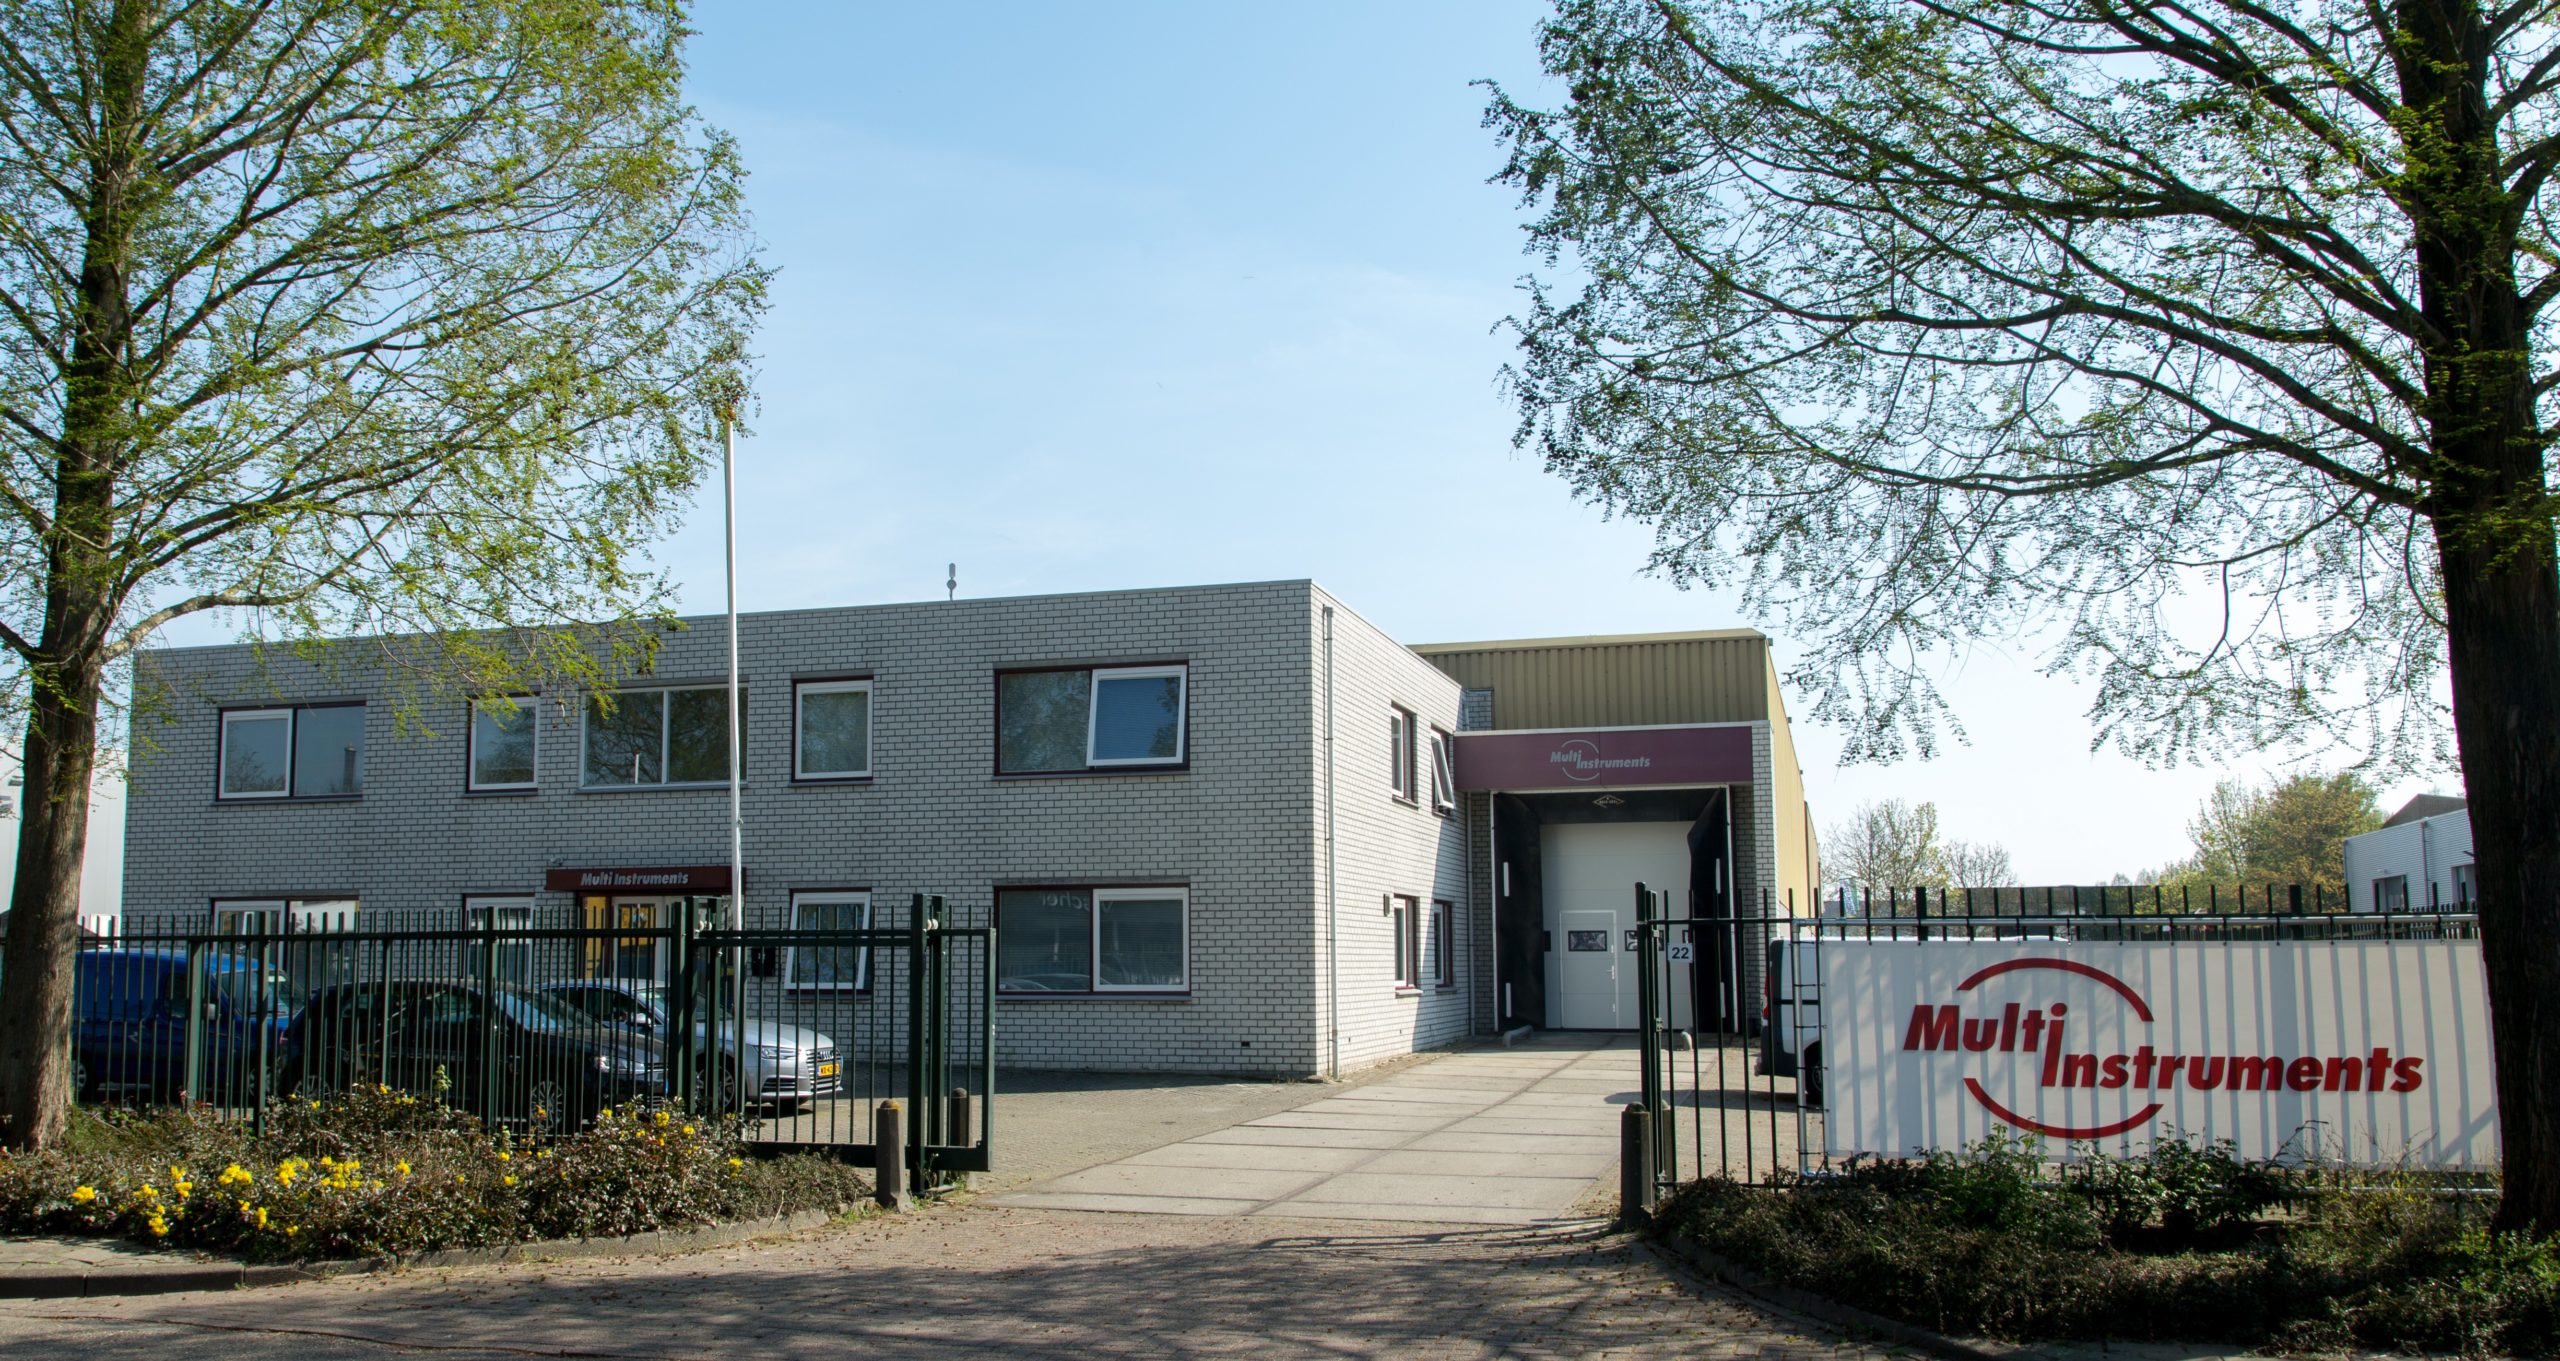 Our main office in Gorinchem, The Netherlands